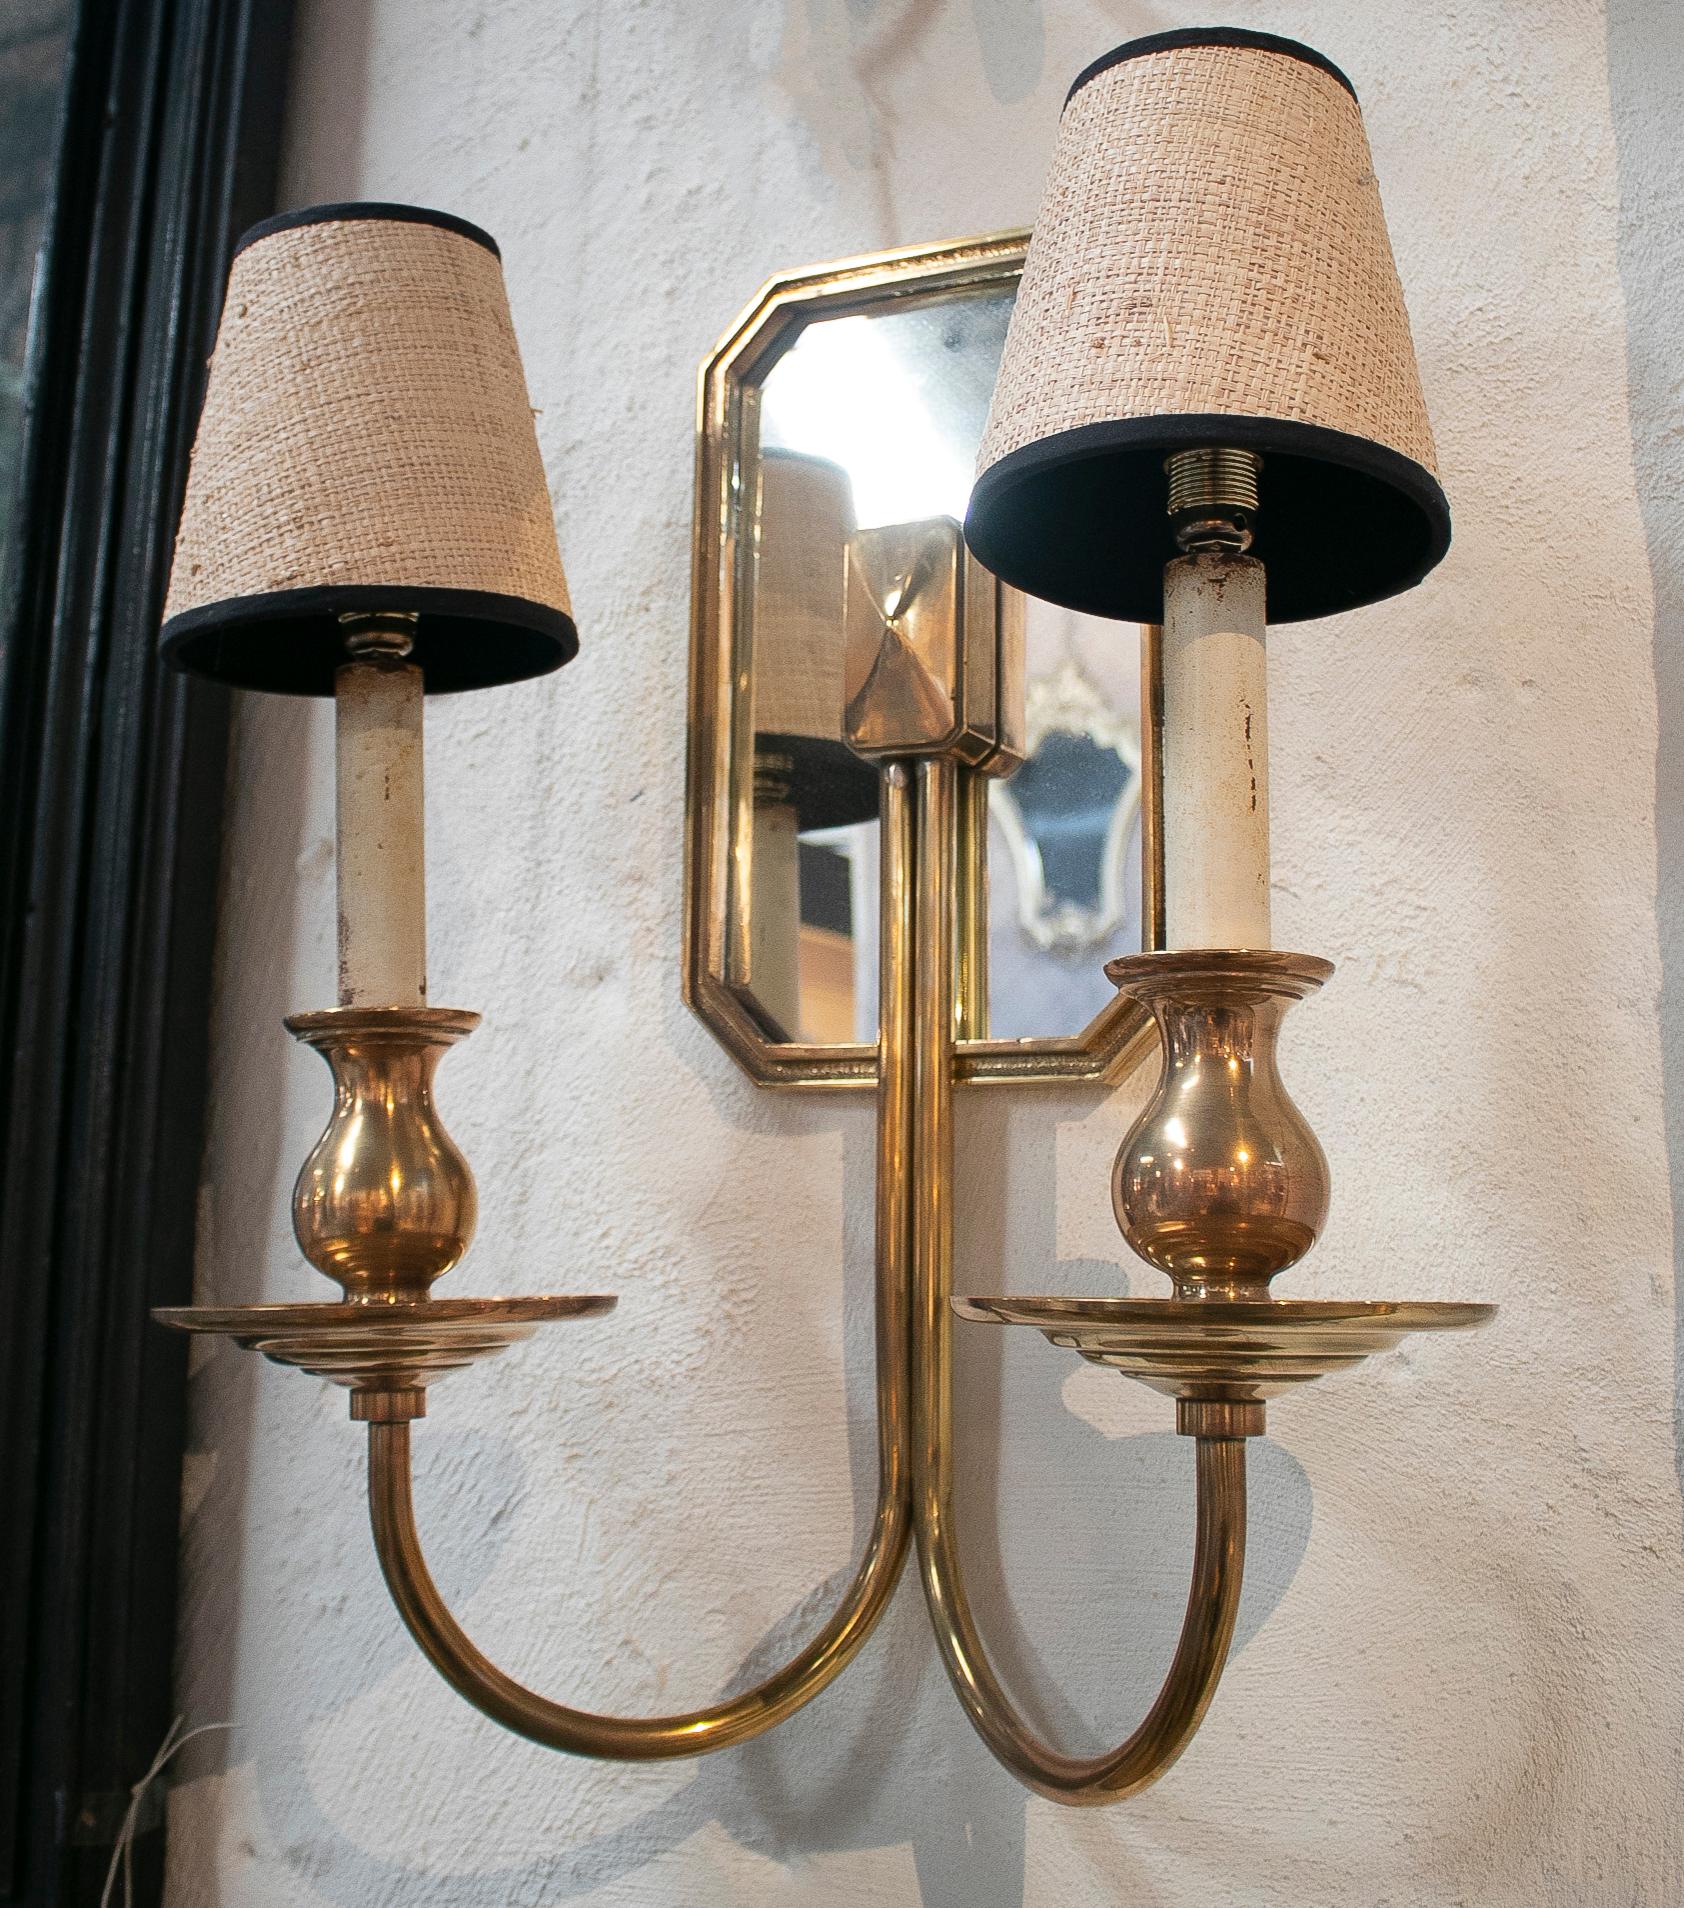 1970s pair of Spanish bronze wall lamps with shades and mirror.